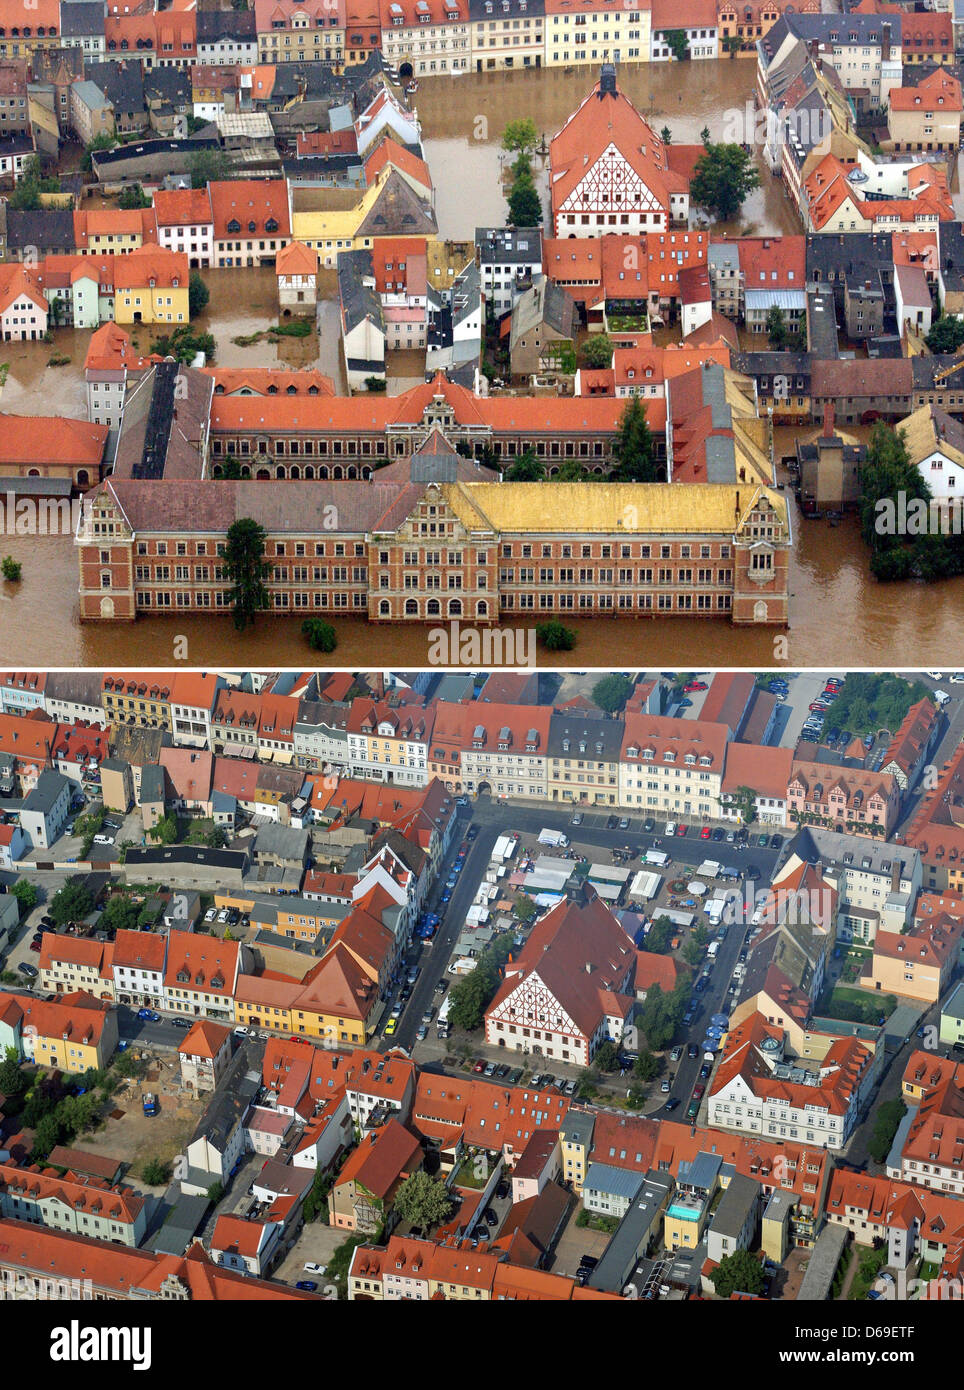 COMBINATION PICTURE - A combination picture shows the city of Grimma which has been flooded by the river Mulde on 14 August 2002 (TOP) and an aerial view of the city hall in Grimma, Germany, 26 July 2012. Grimma was one of the cities most affected by the flood desaster in 2002. Ten years after the flood Grimma is a flourishing town again. Photo: Kasper;Schmidt Stock Photo